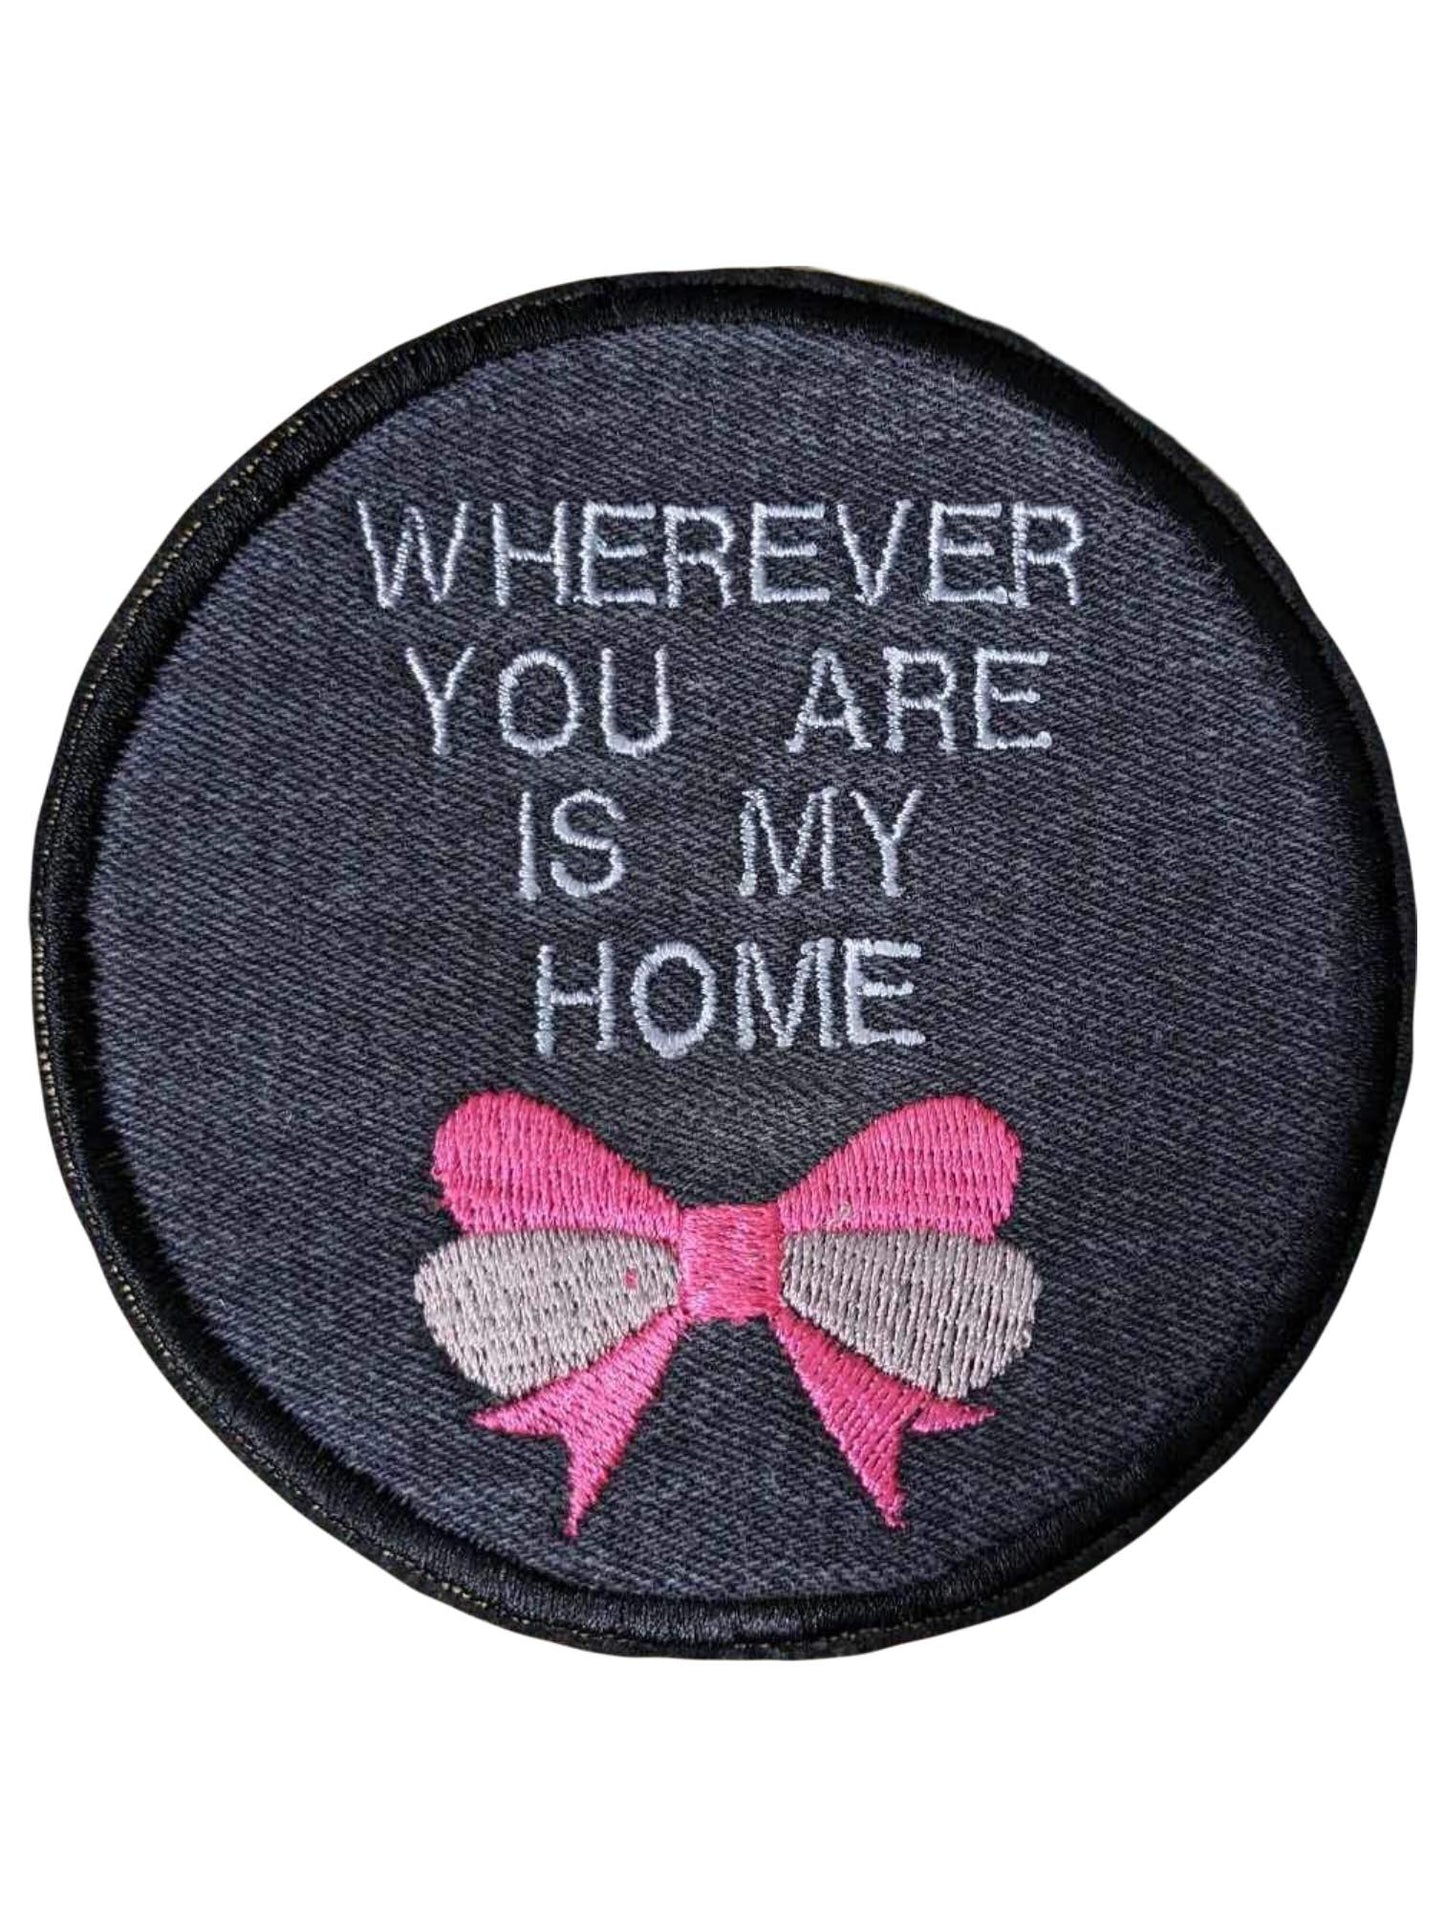 Jane Eyre Recycled Denim Sew On Patch -  Wherever You Are is my Home - Cute Bow Detail